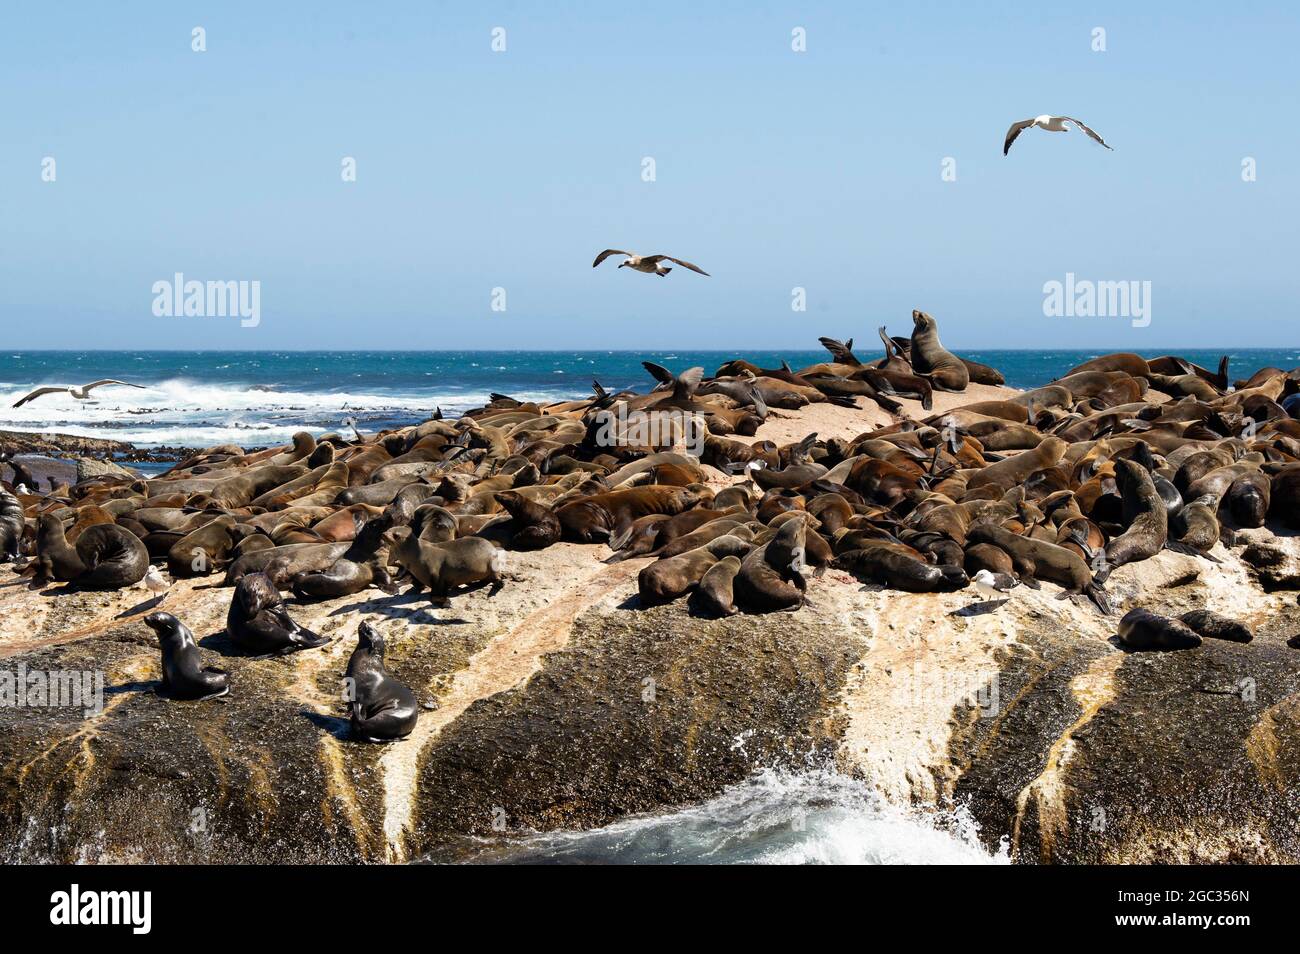 Seal colony at Duiker Island, Hout Bay, South Africa Stock Photo